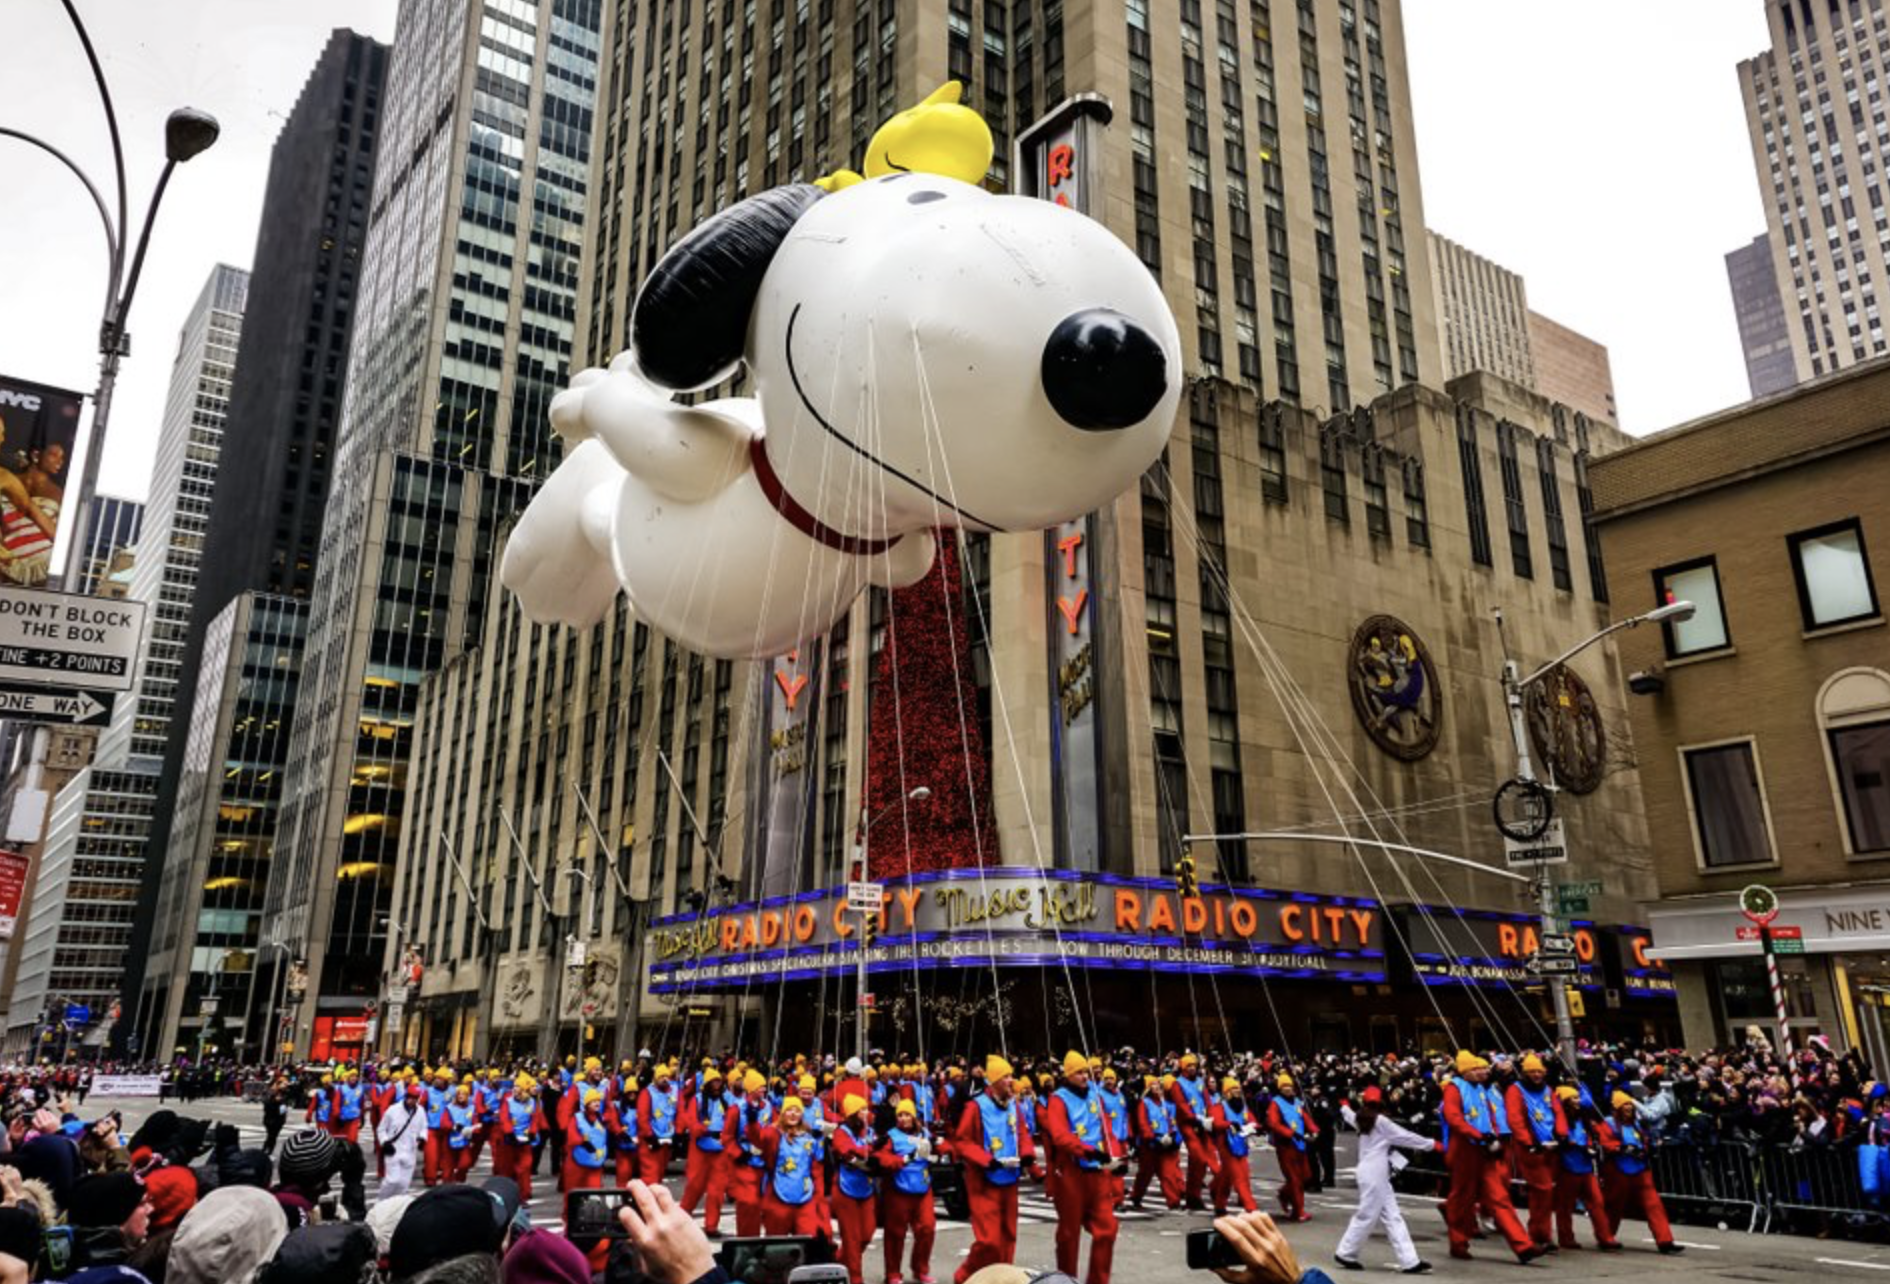 How to Attend the Macy’s Parade